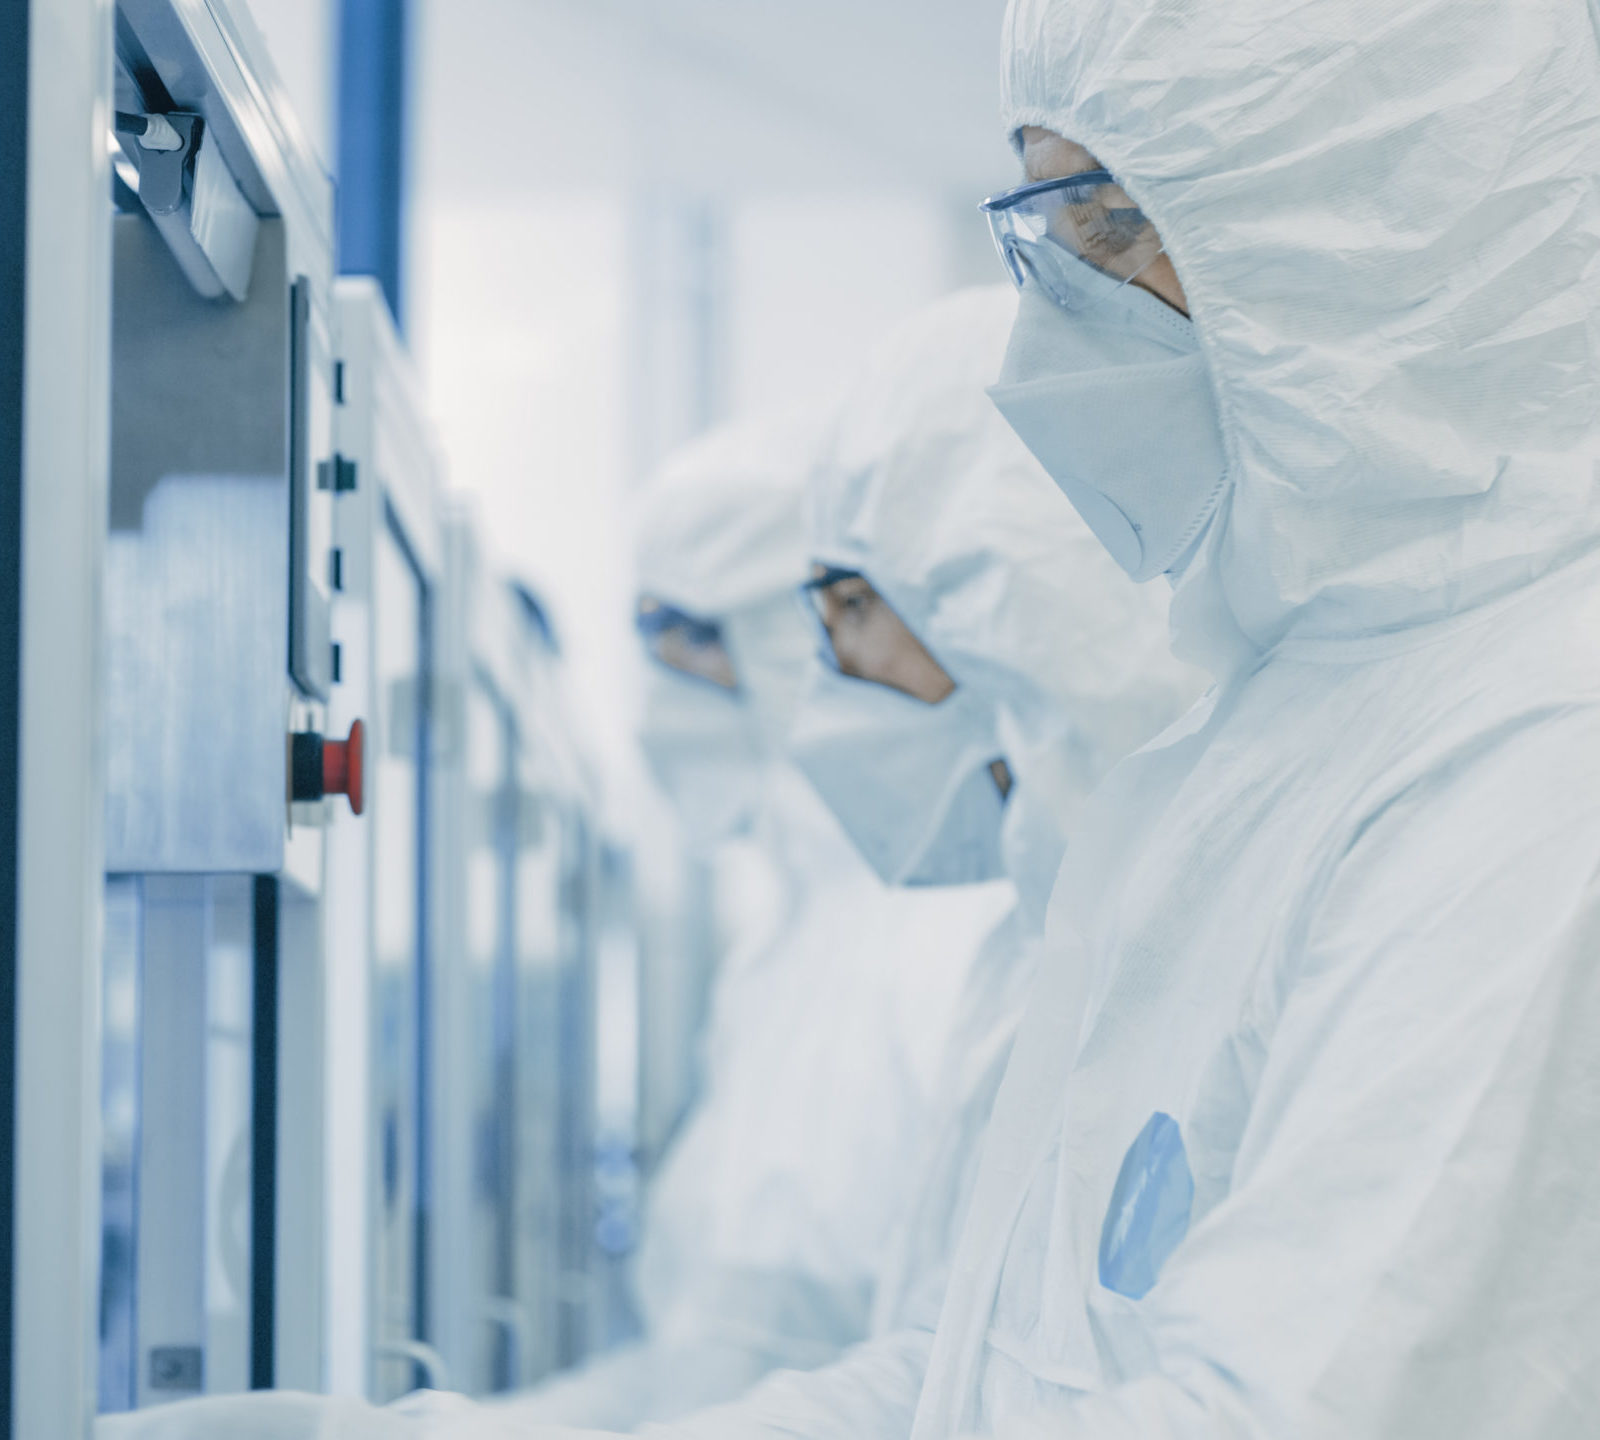 Semiconductor scientists wearing protective gear working on machines in factory